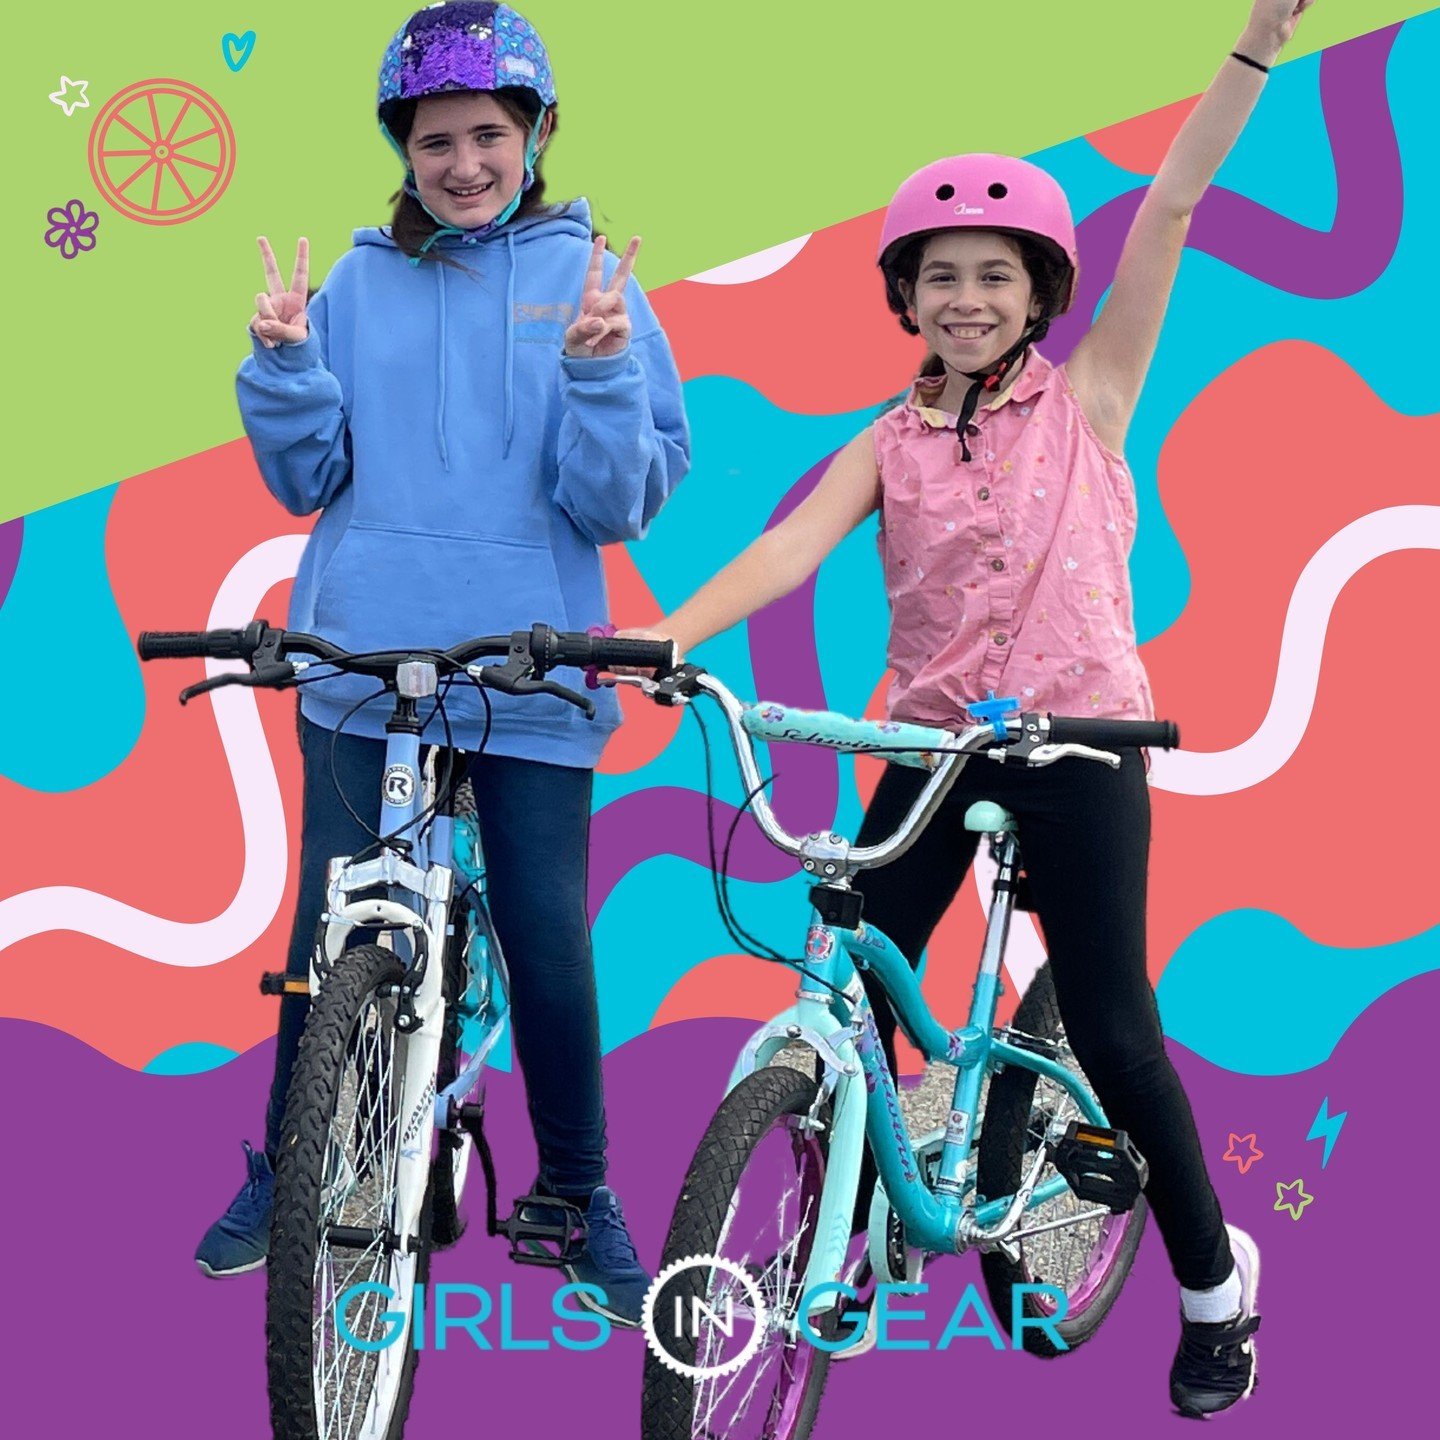 Ready, set, ride! Pedal Power, Girls in Gear's annual fundraiser, is back and gearing up to empower more girls through the power of bikes! By supporting our work, you're: 

✦ Expand our reach and impact more girls in our community
✦ Provide essential